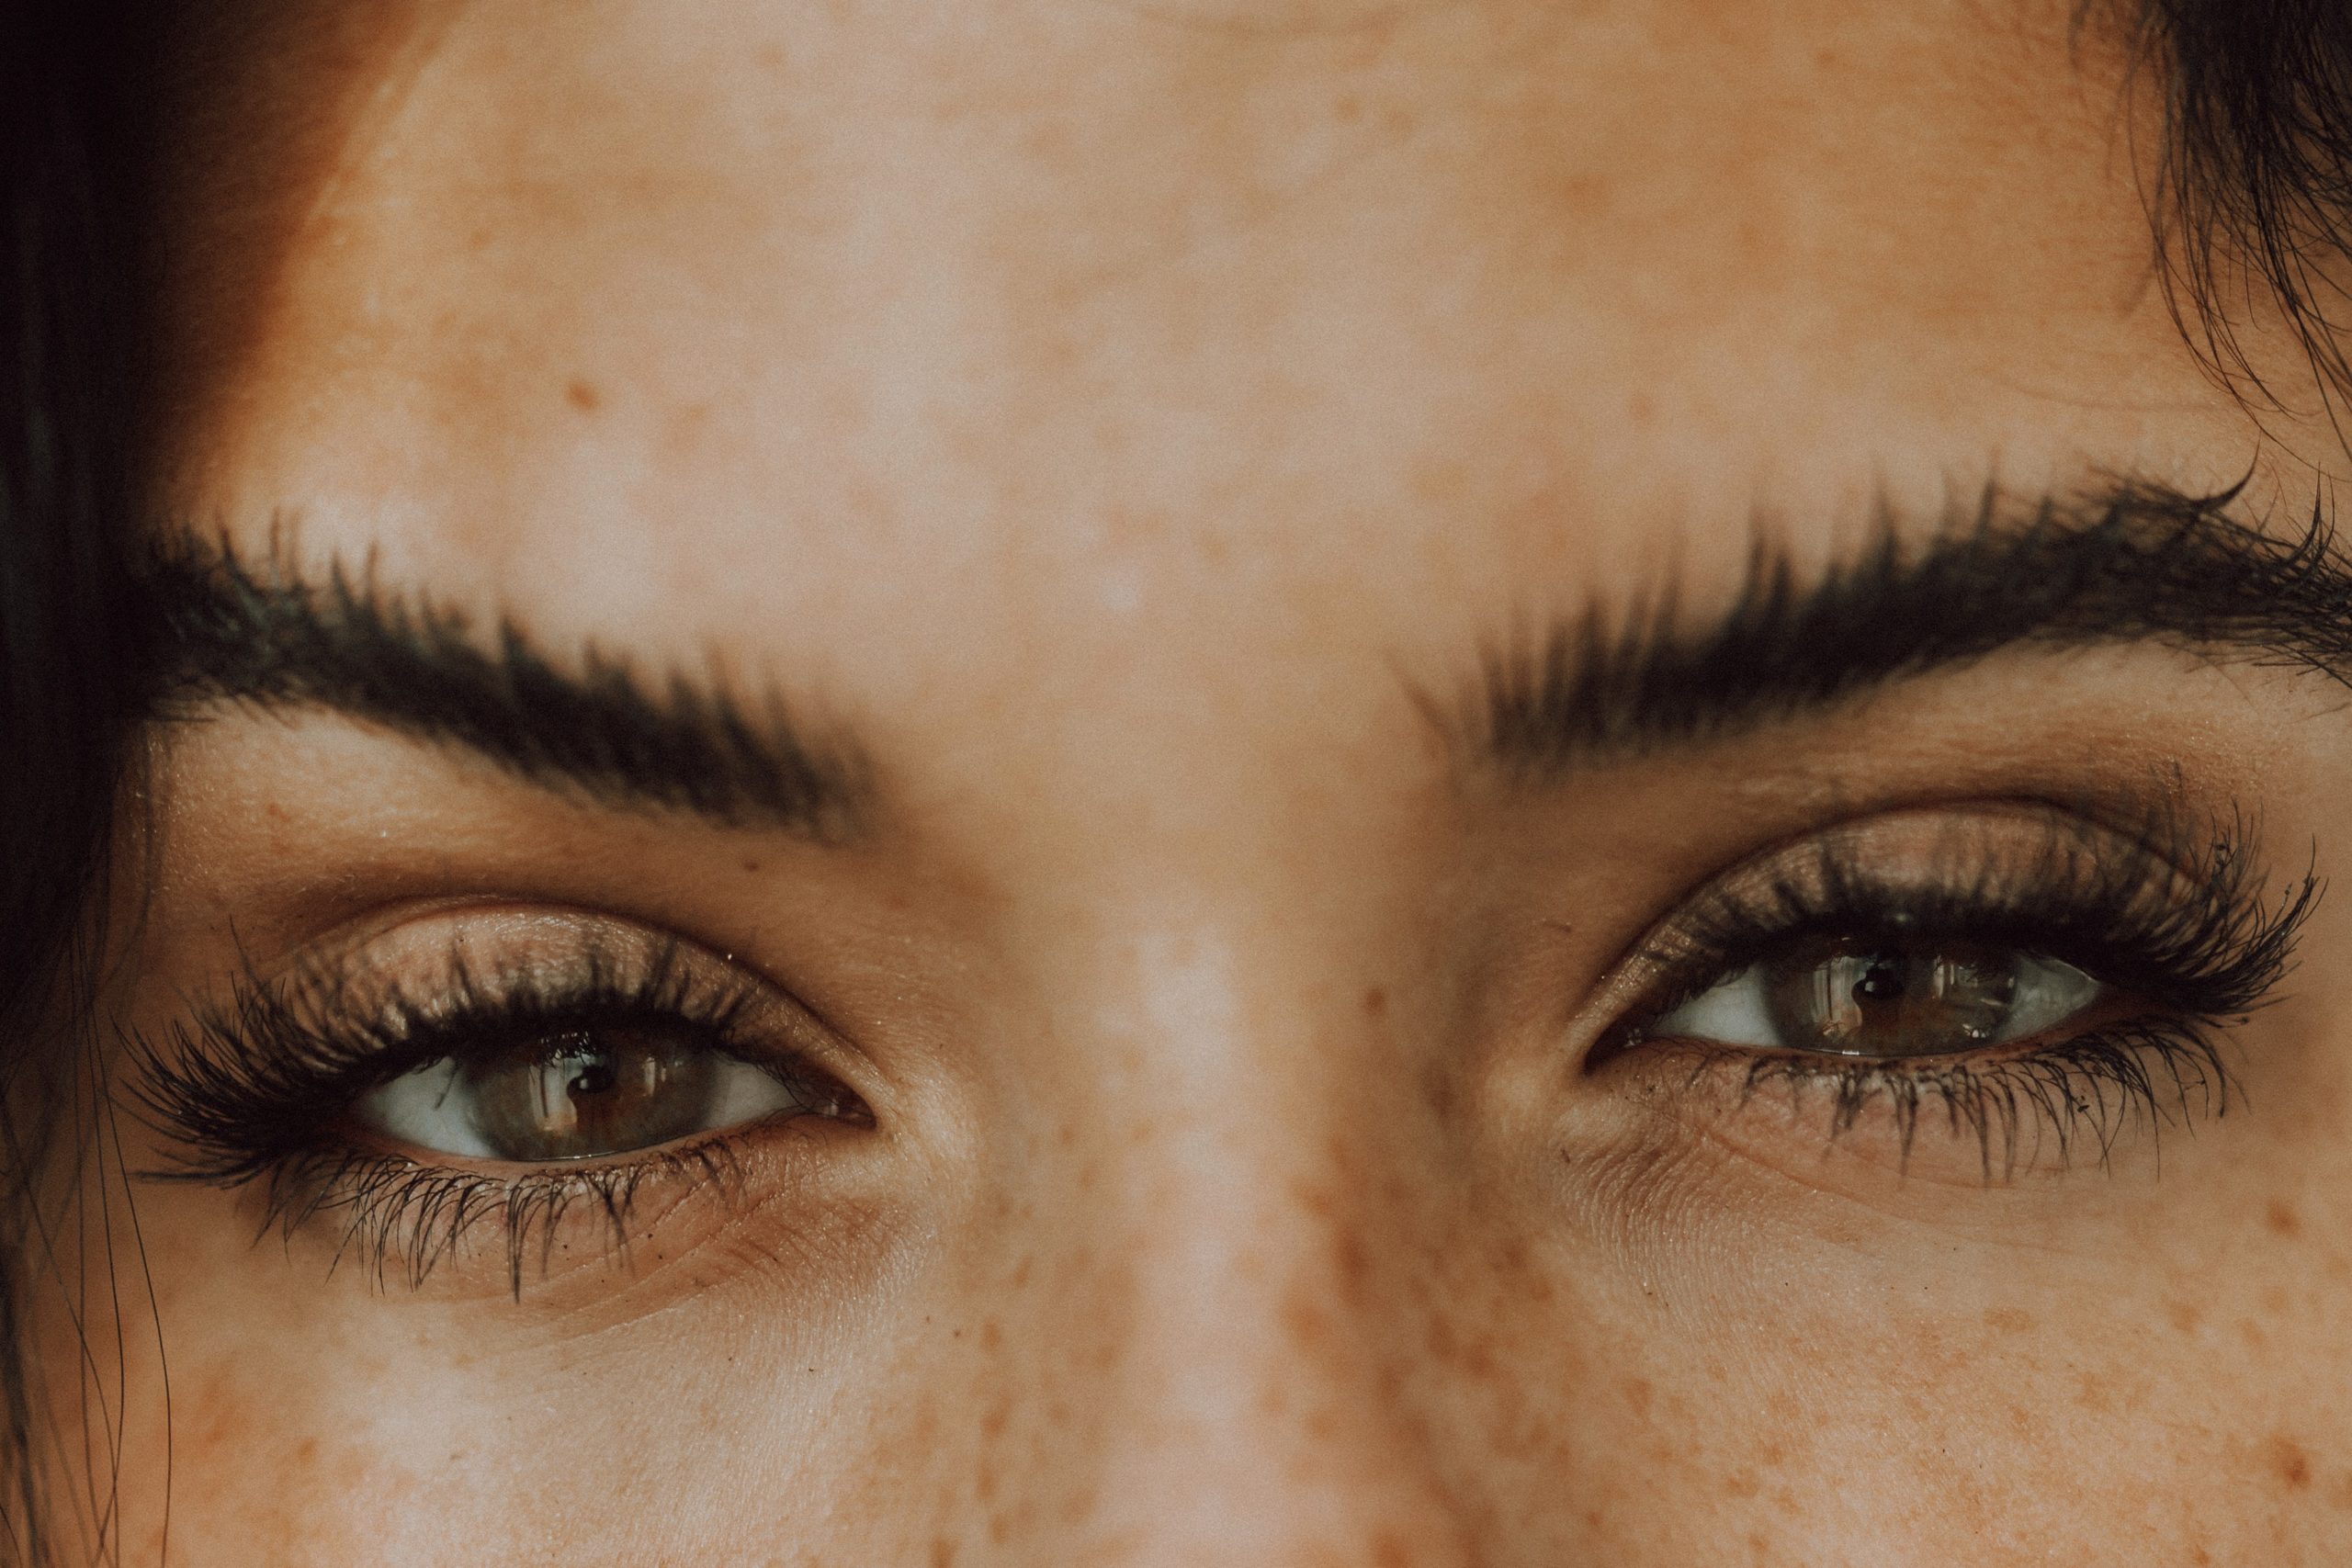 A close-up of a woman's forehead, eyebrows, eyes and the top part of her nose